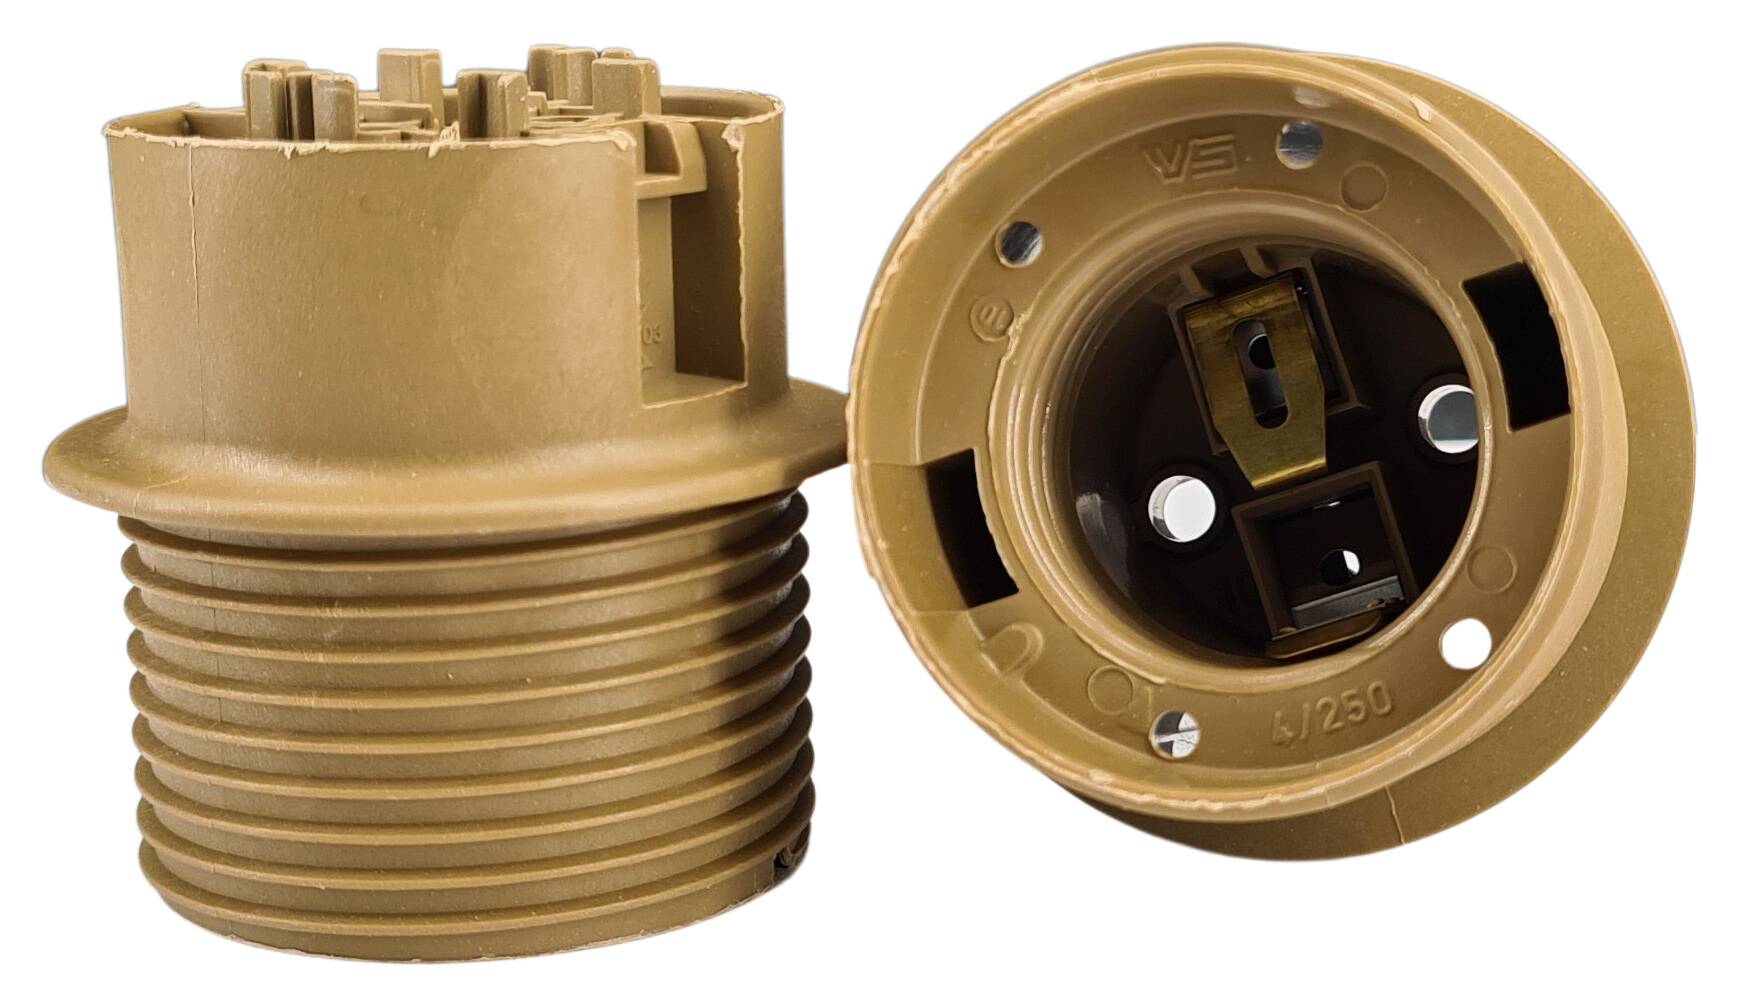 E27 partial-threaded for two-part thermoplastic lampholder gold